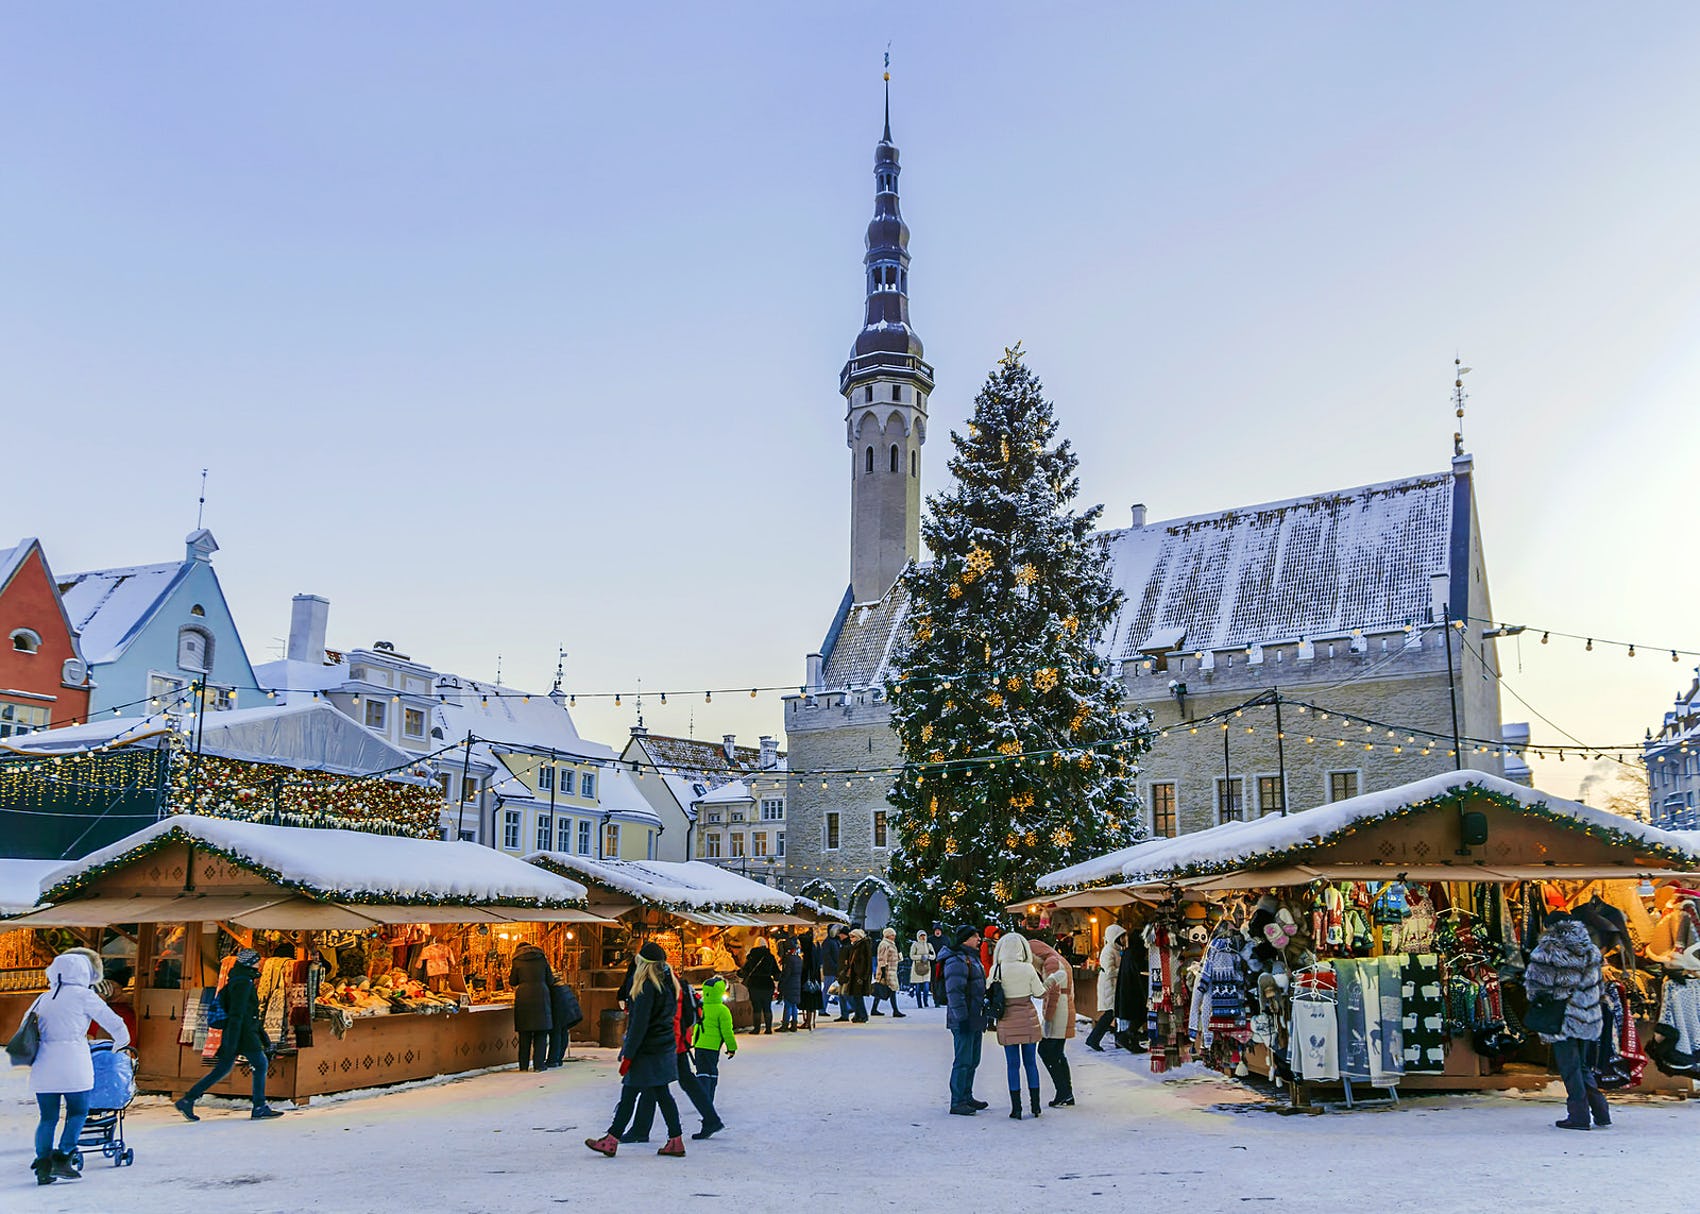 The 10 best Christmas markets in Europe you may not have known about